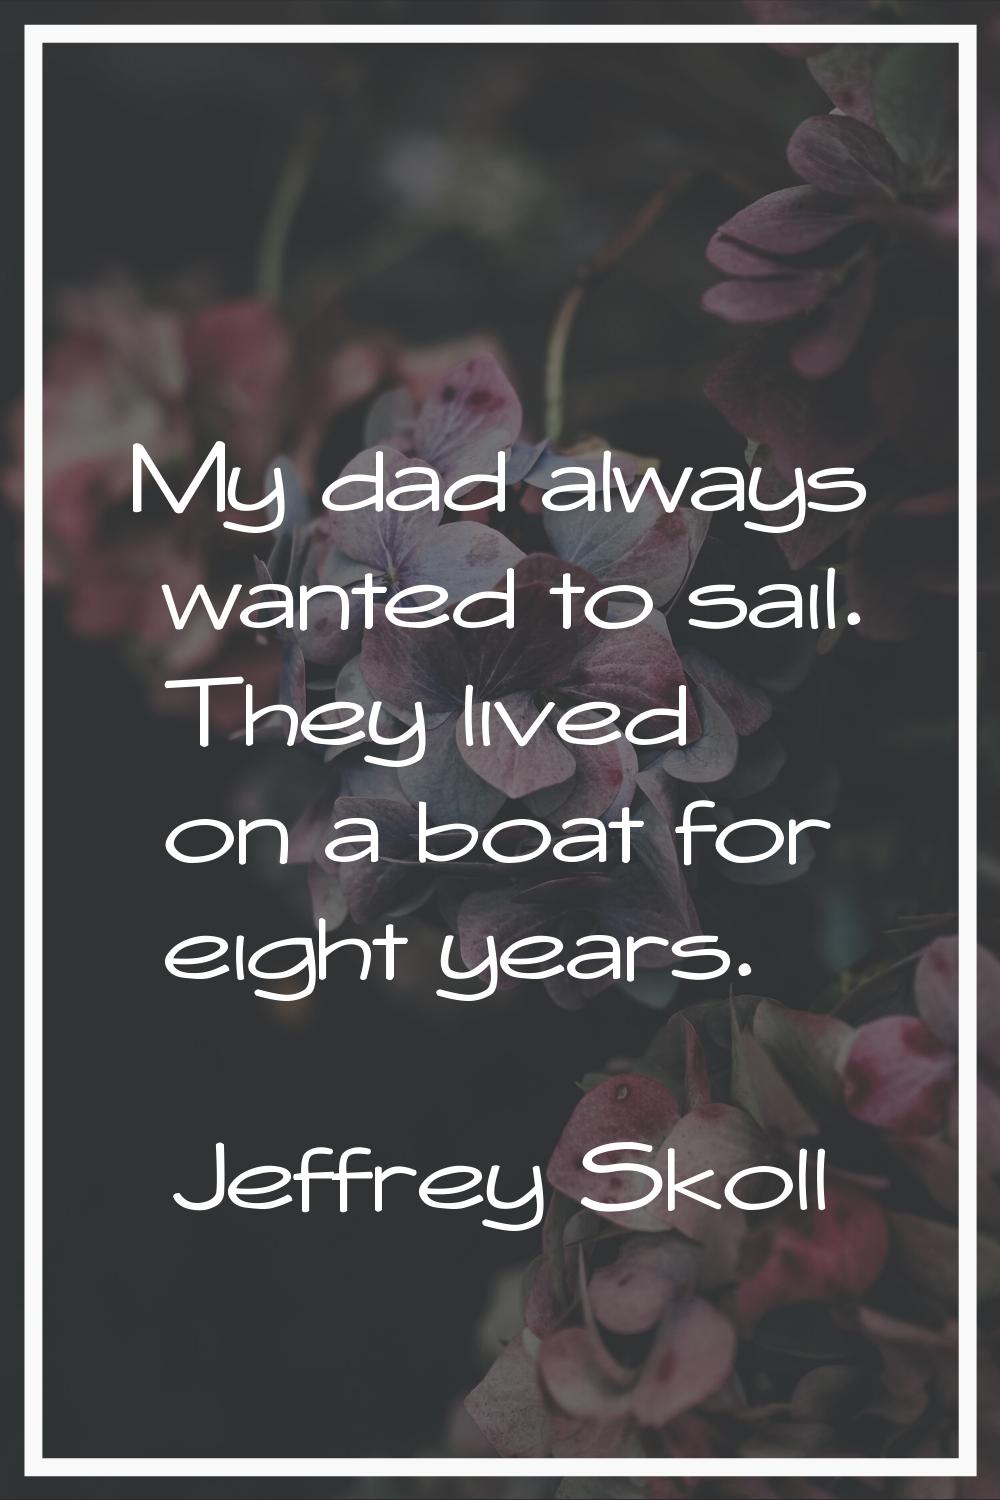 My dad always wanted to sail. They lived on a boat for eight years.